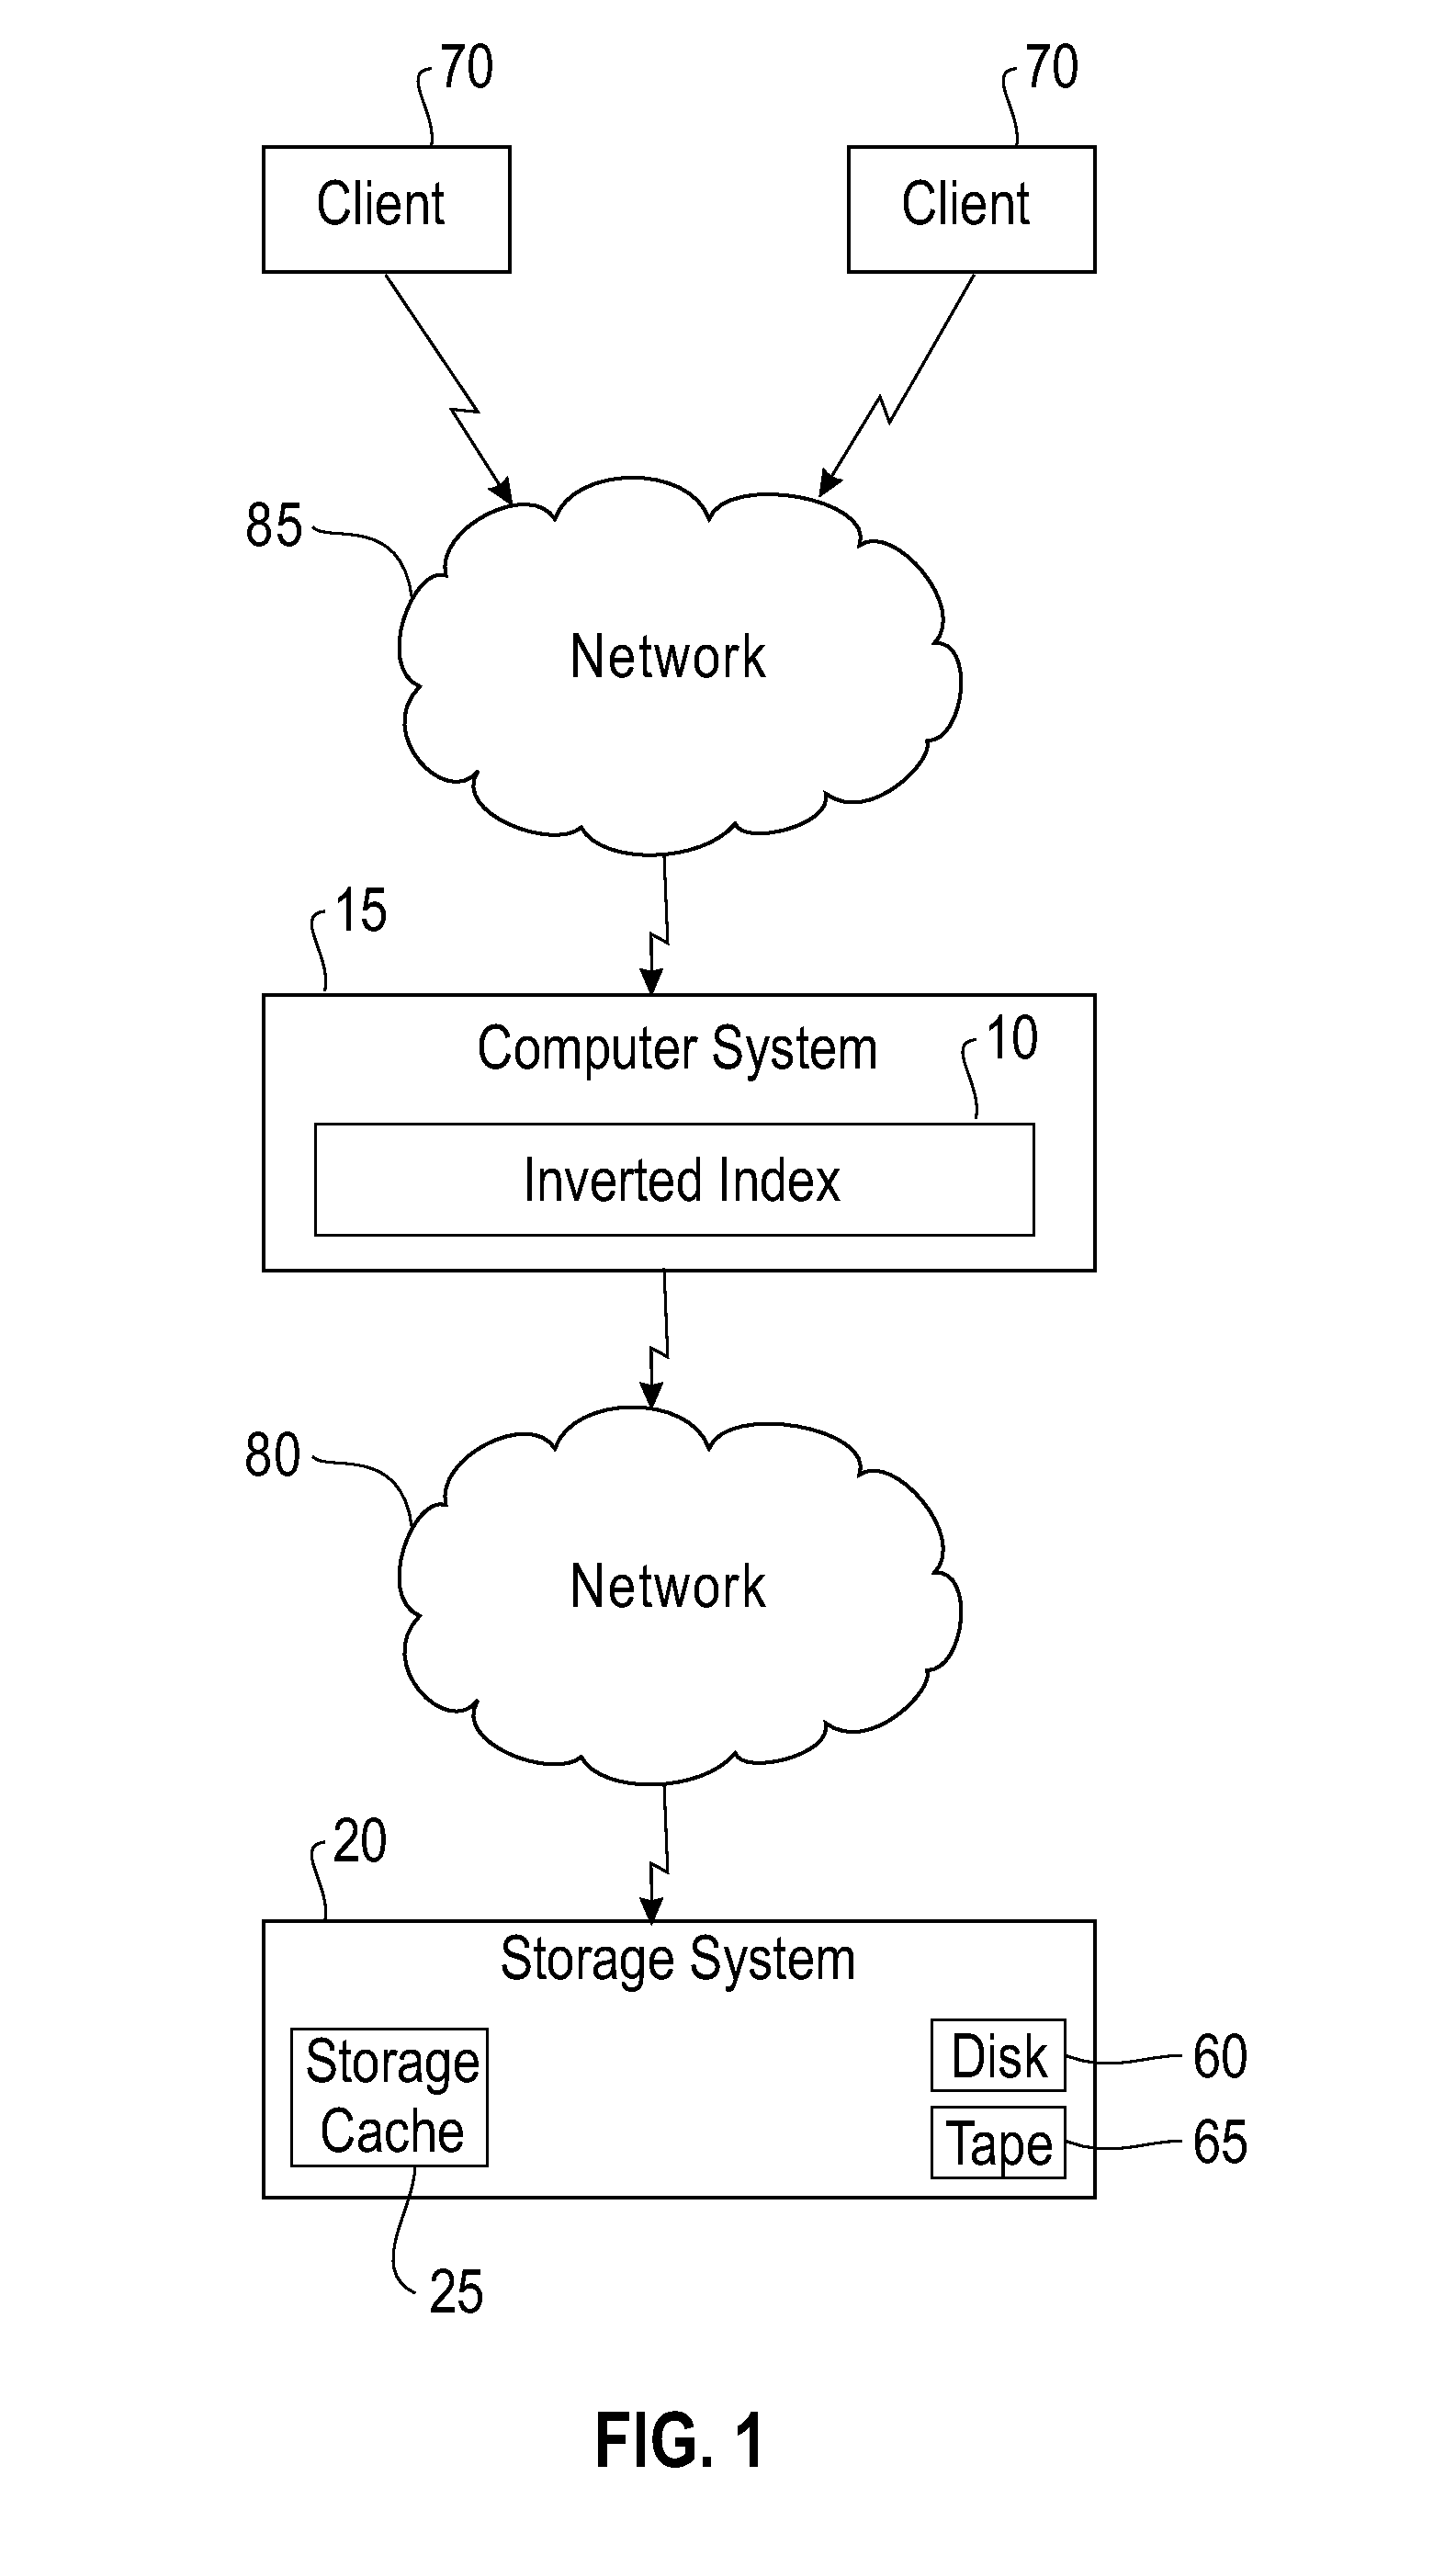 System and Method for Providing a Trustworthy Inverted Index to Enable Searching of Records